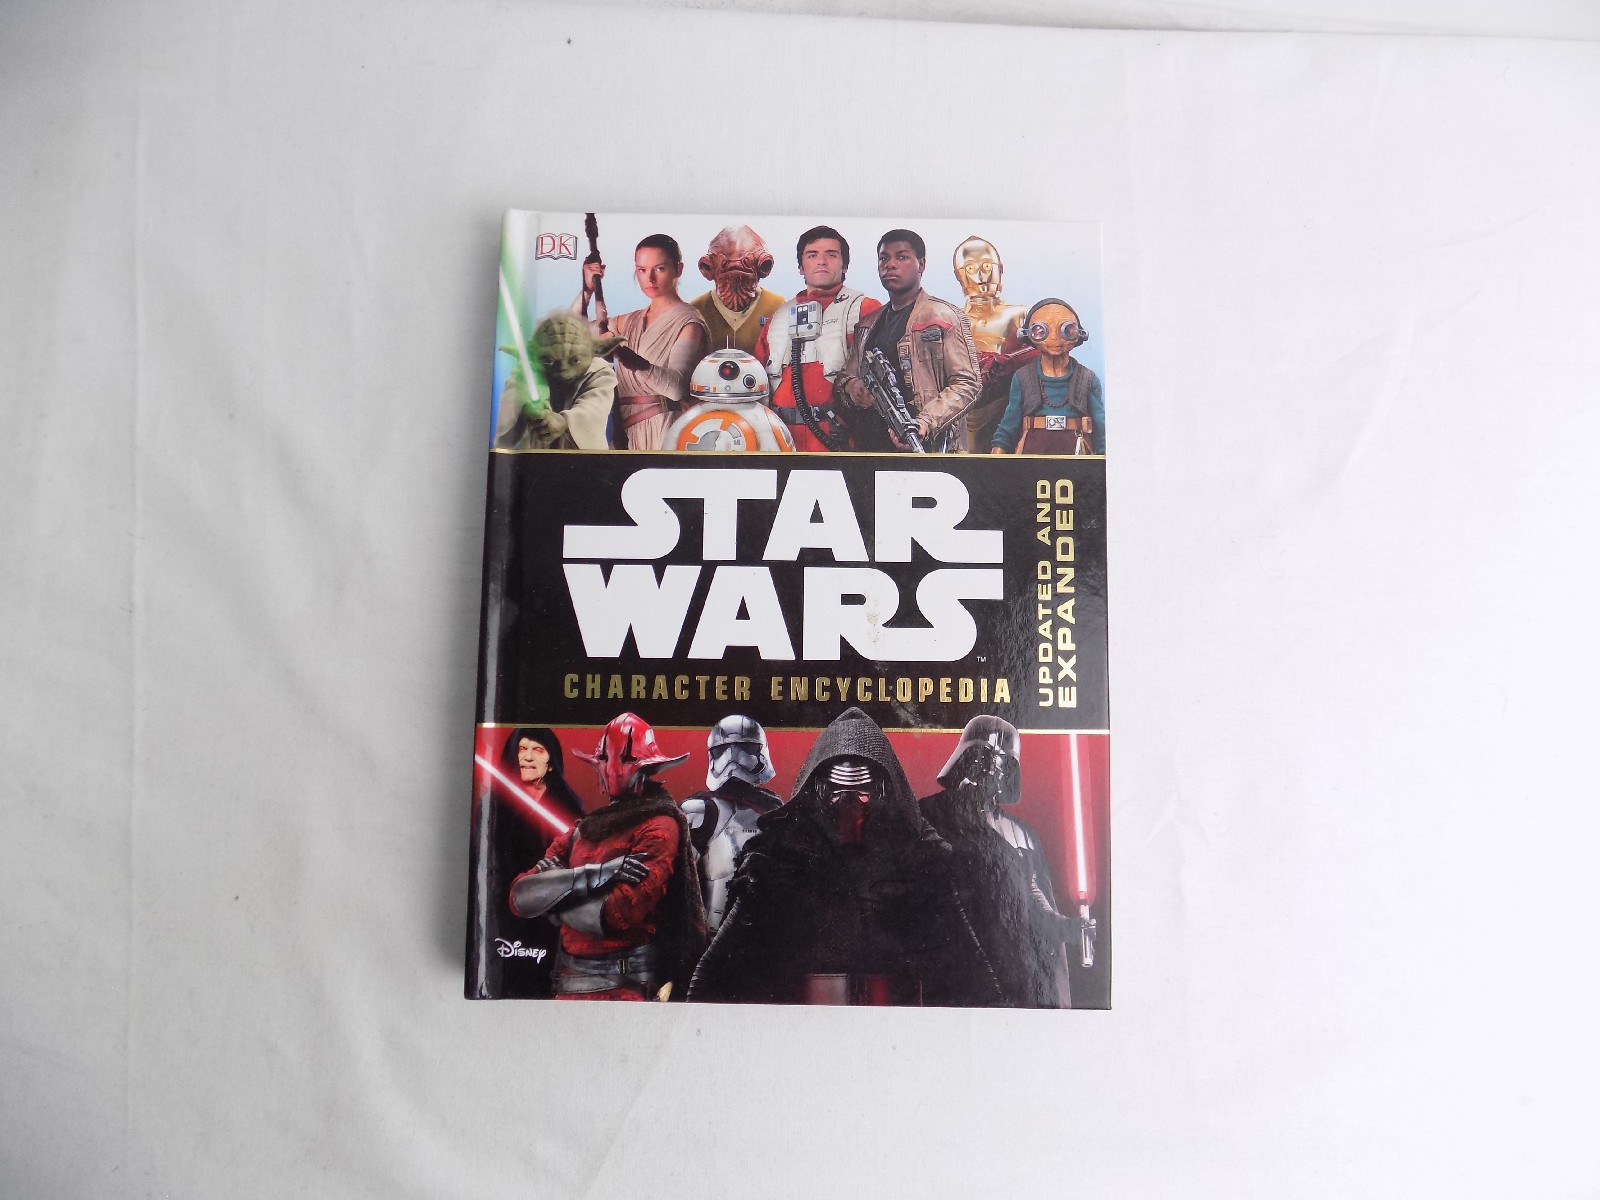 And　Wars　Character　Encyclopedia　Updated　Star　Starboard　Games　DK　Expanded